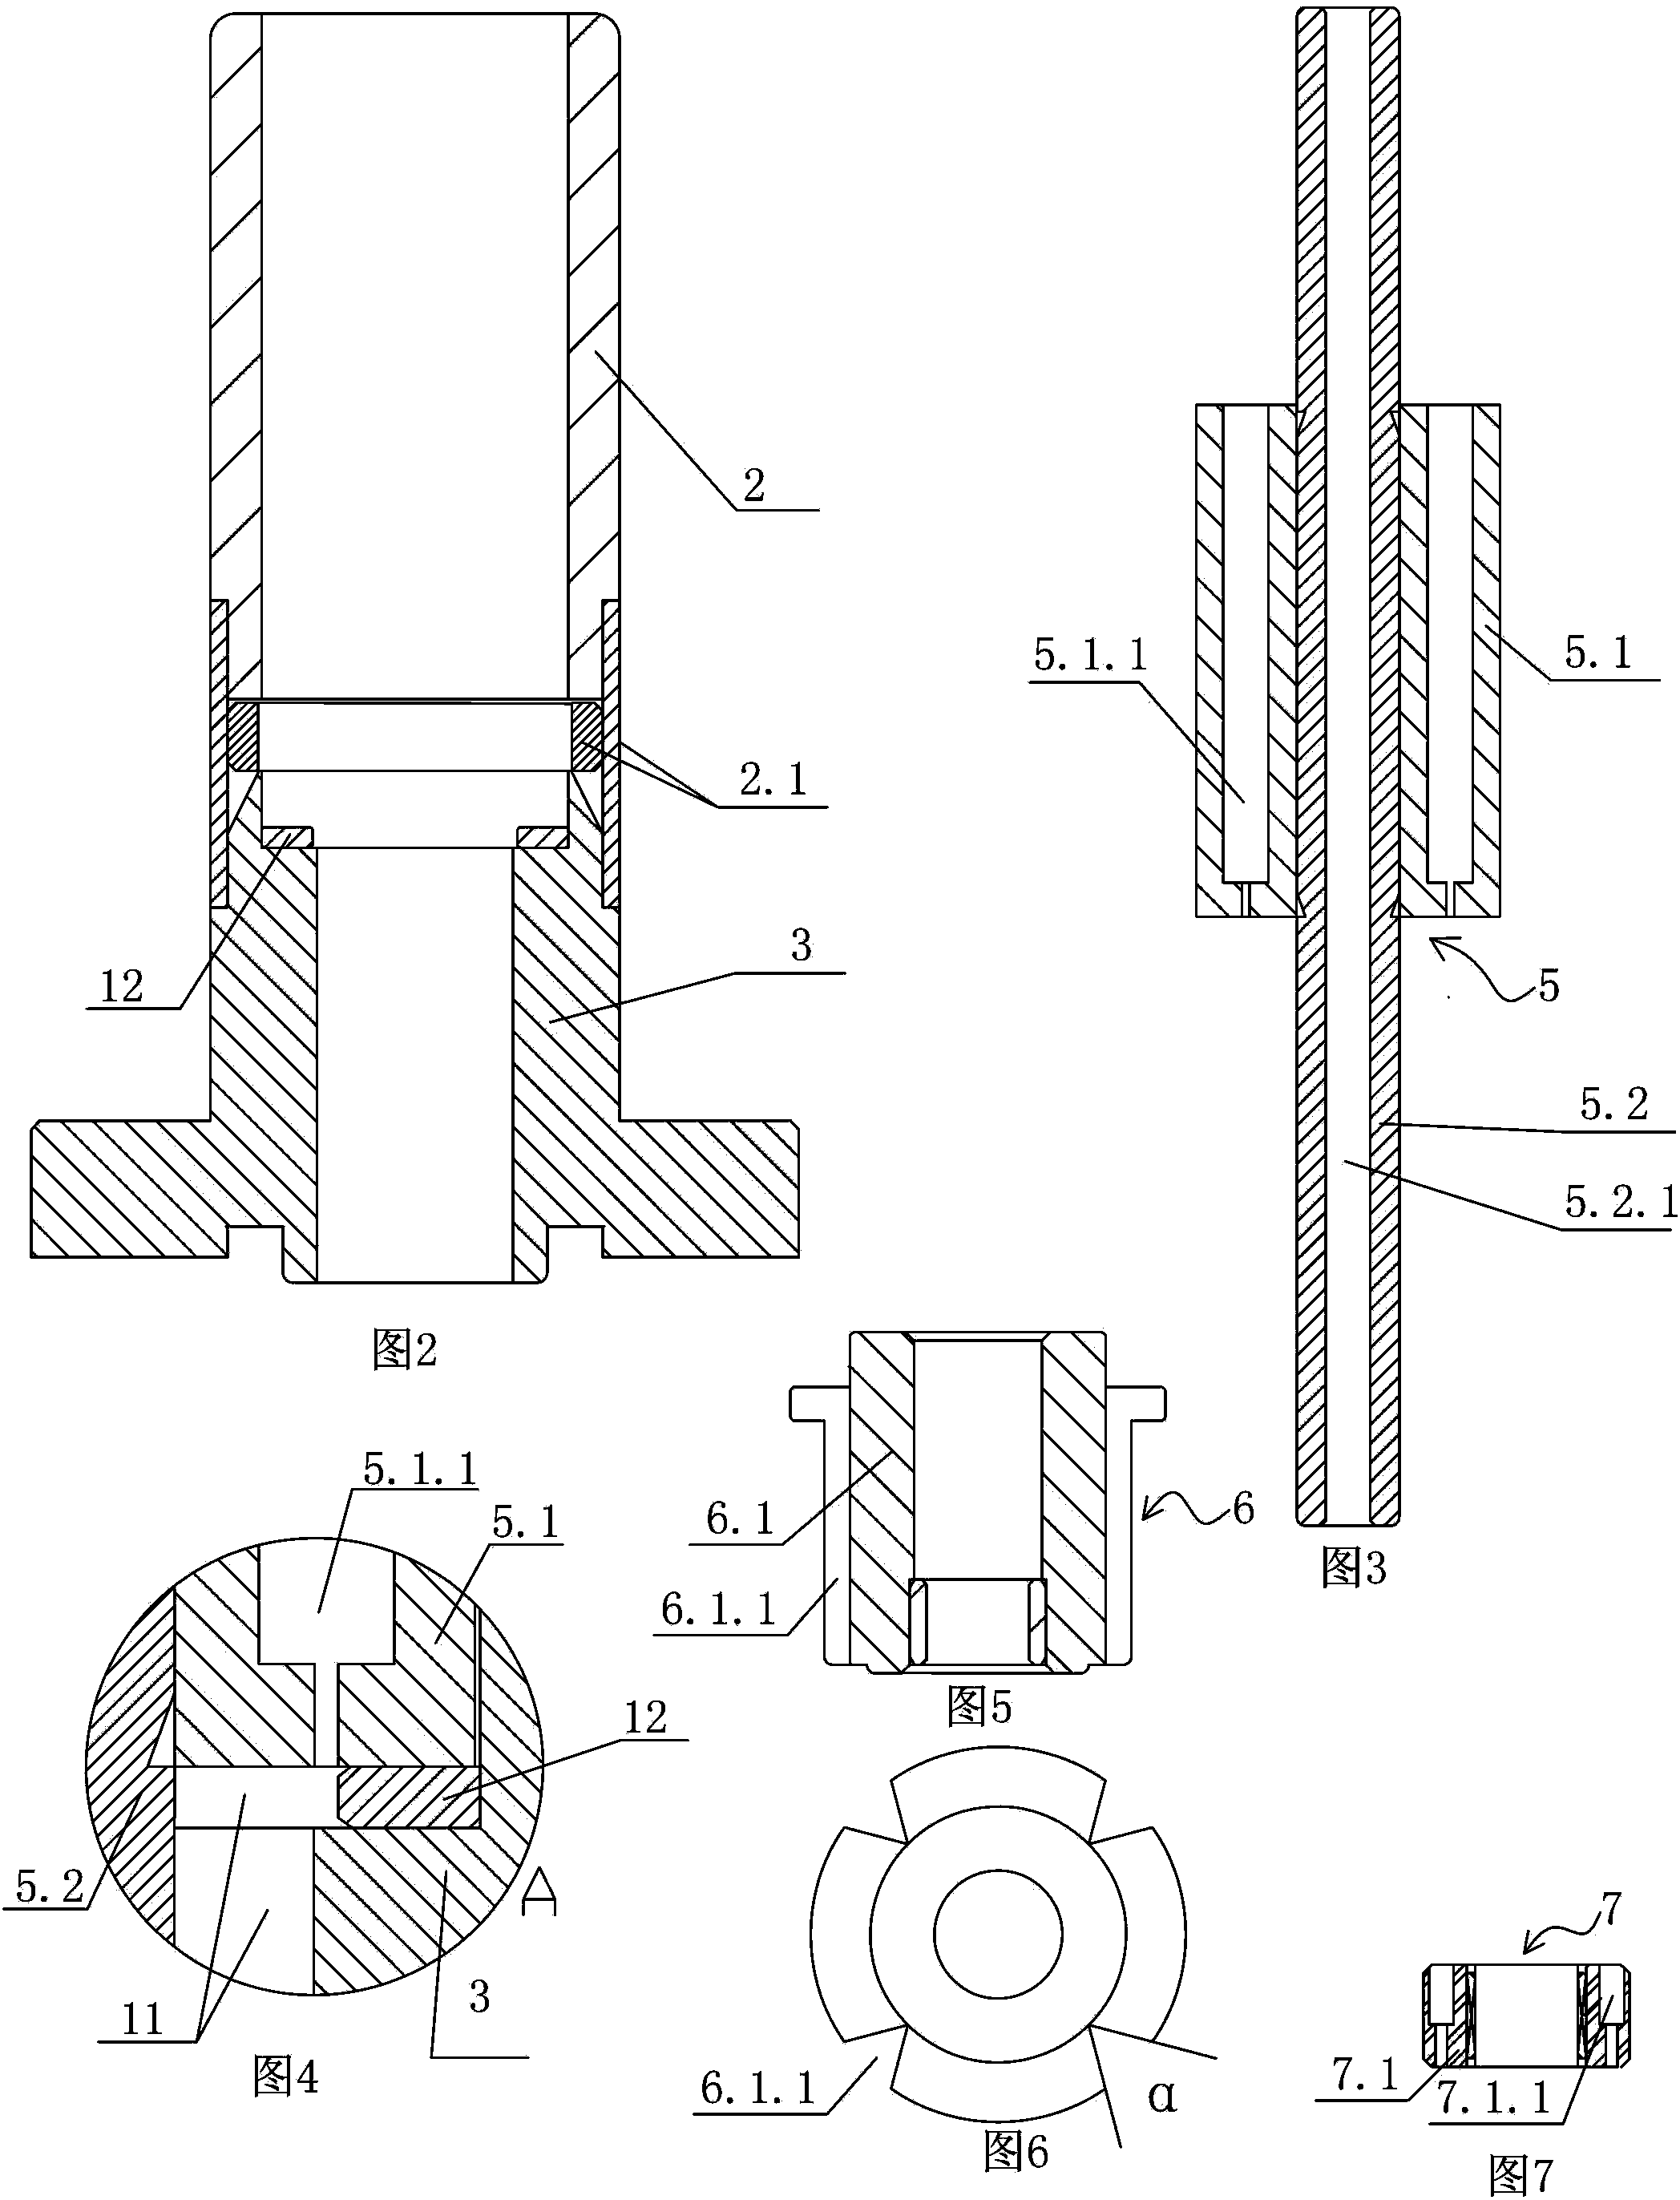 Proportional solenoid for controlling hydraulic valve spool position